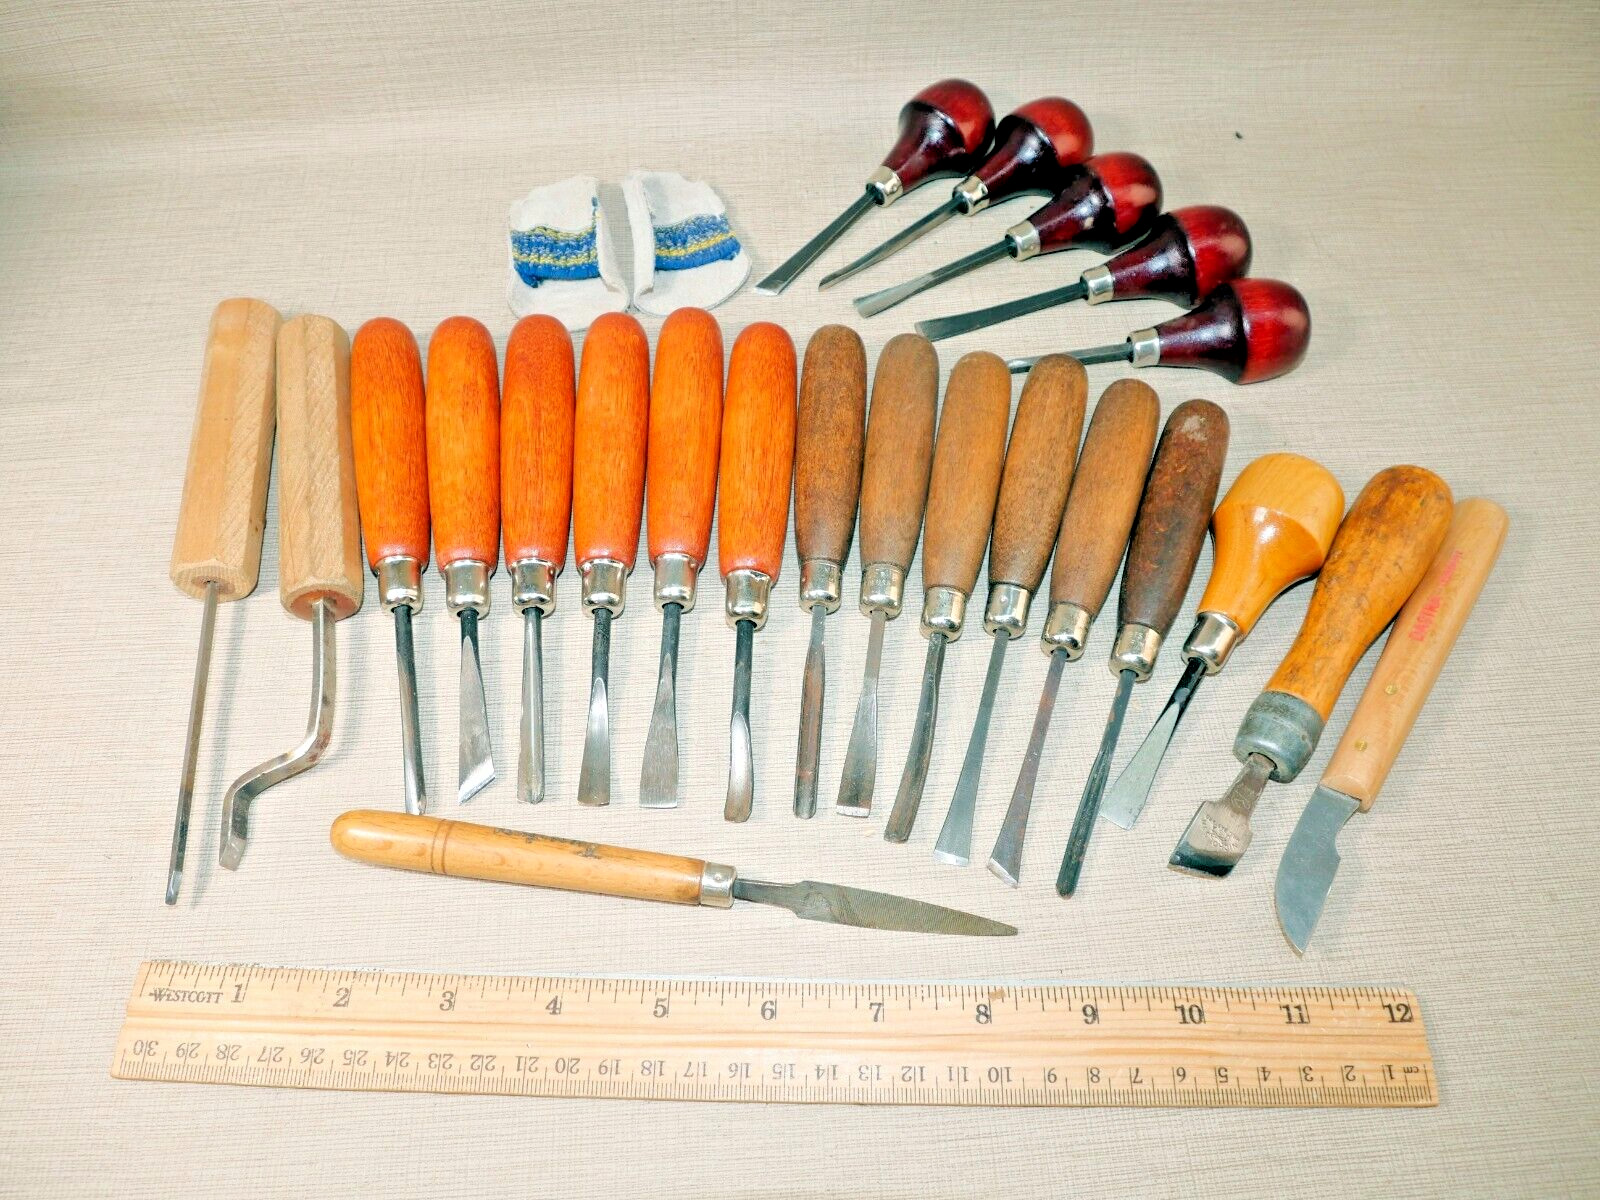 Lot of 23 vintage used wood carving tools and chisels